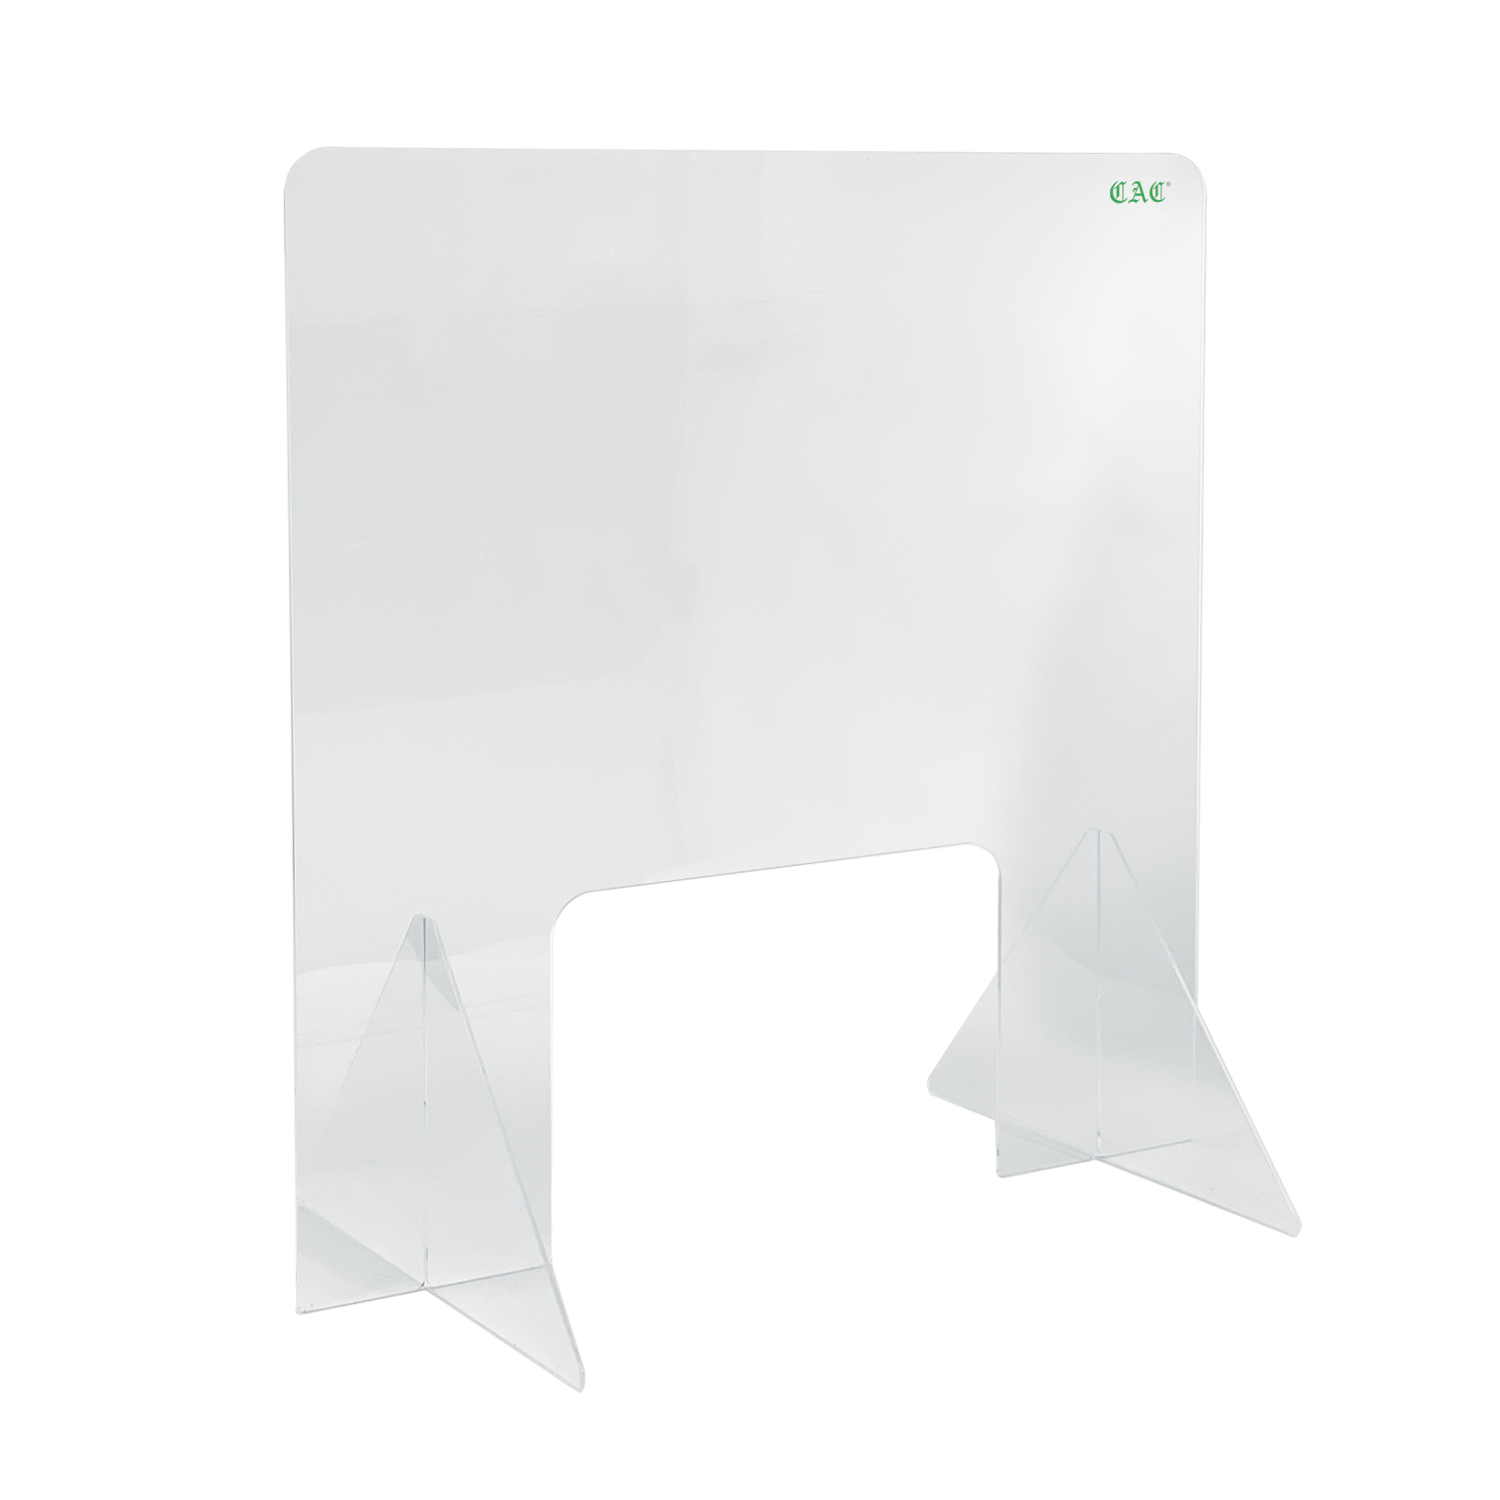 CAC China SHLD-2424 Self-Standing Acrylic Shield with Window 24" W x 24" H